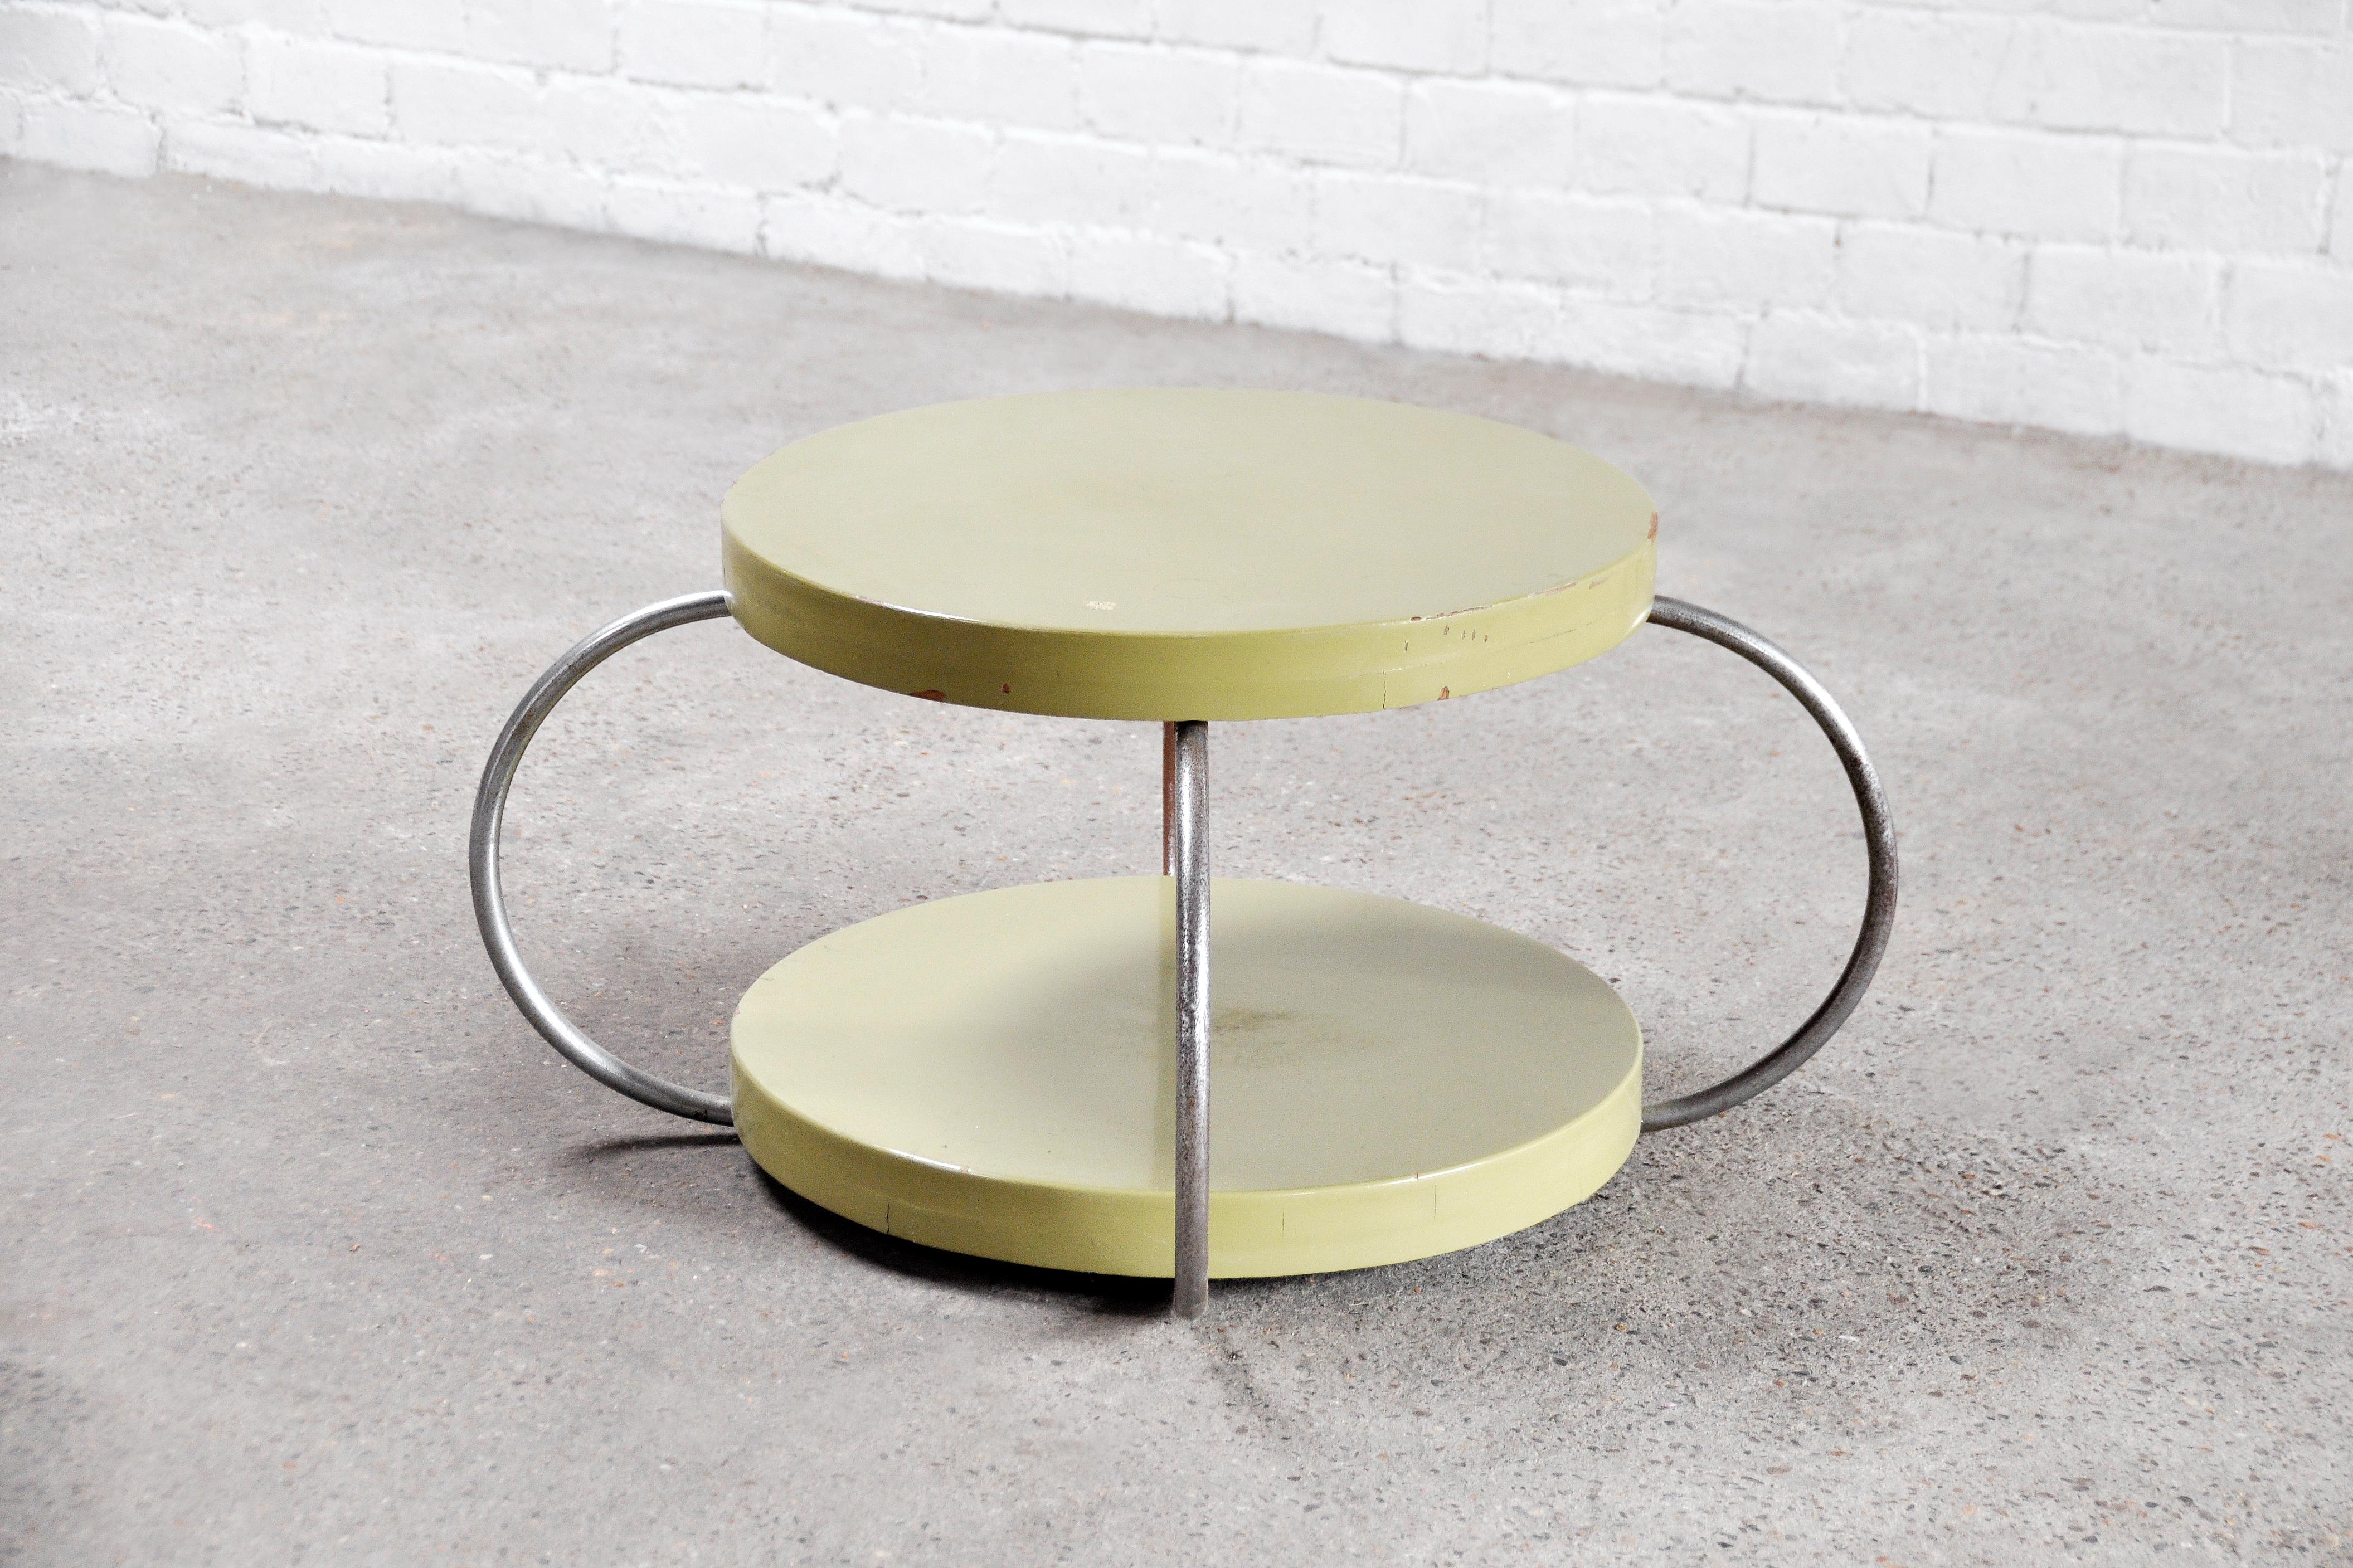 A unique and completely original early bauhaus coffee or side table. The table tops are made out of mint green lacquered wood. Two tier system connected by sculptural steel tubes. A never before seen and rare early model in completely original